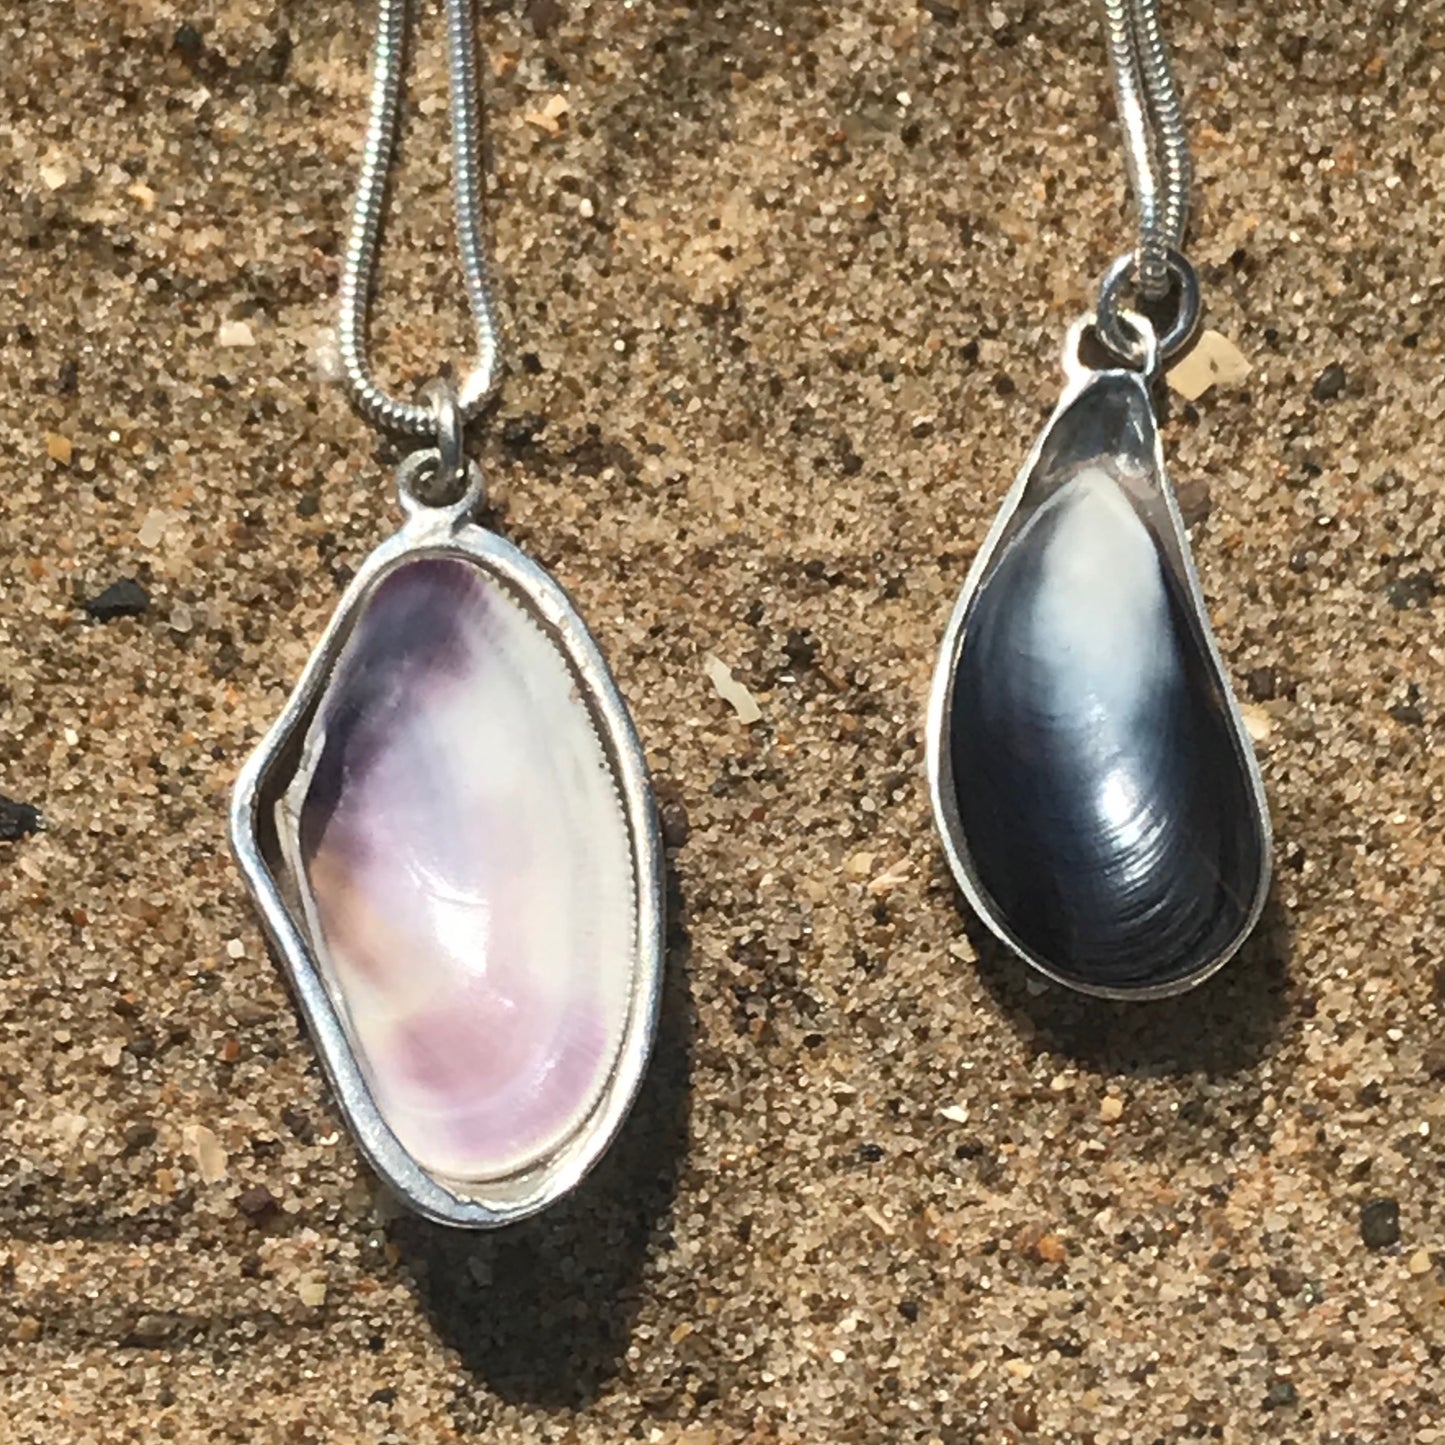 pipi and mussel shells in silver